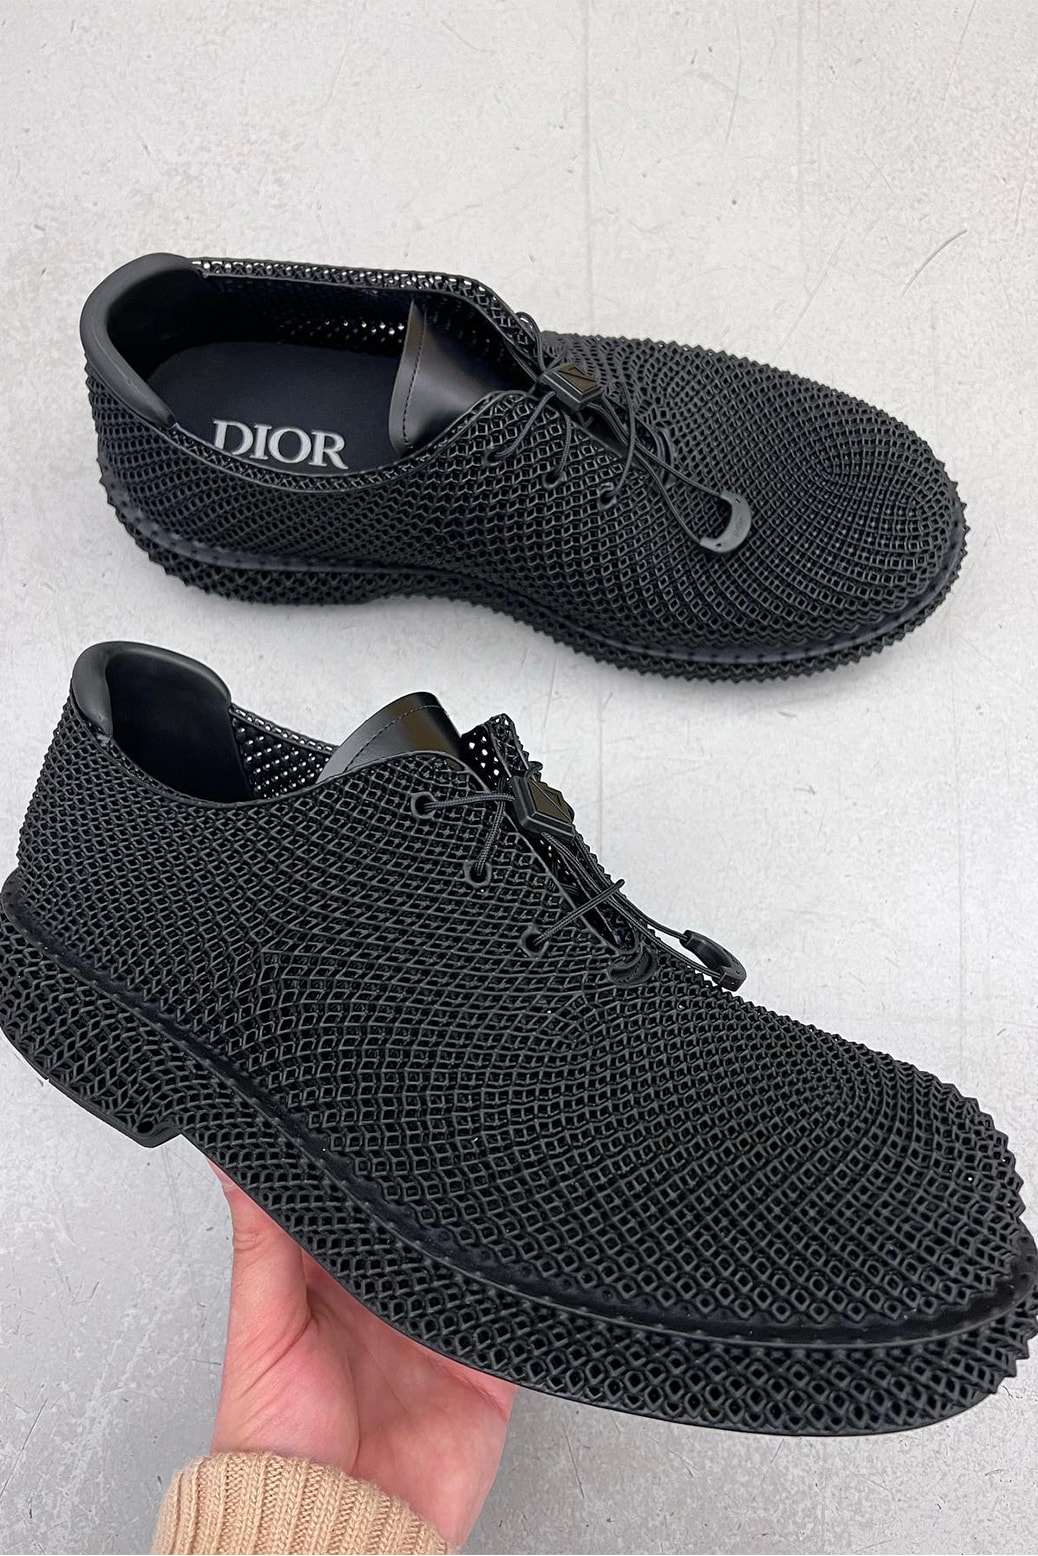 Pin on Dior Shoes Men